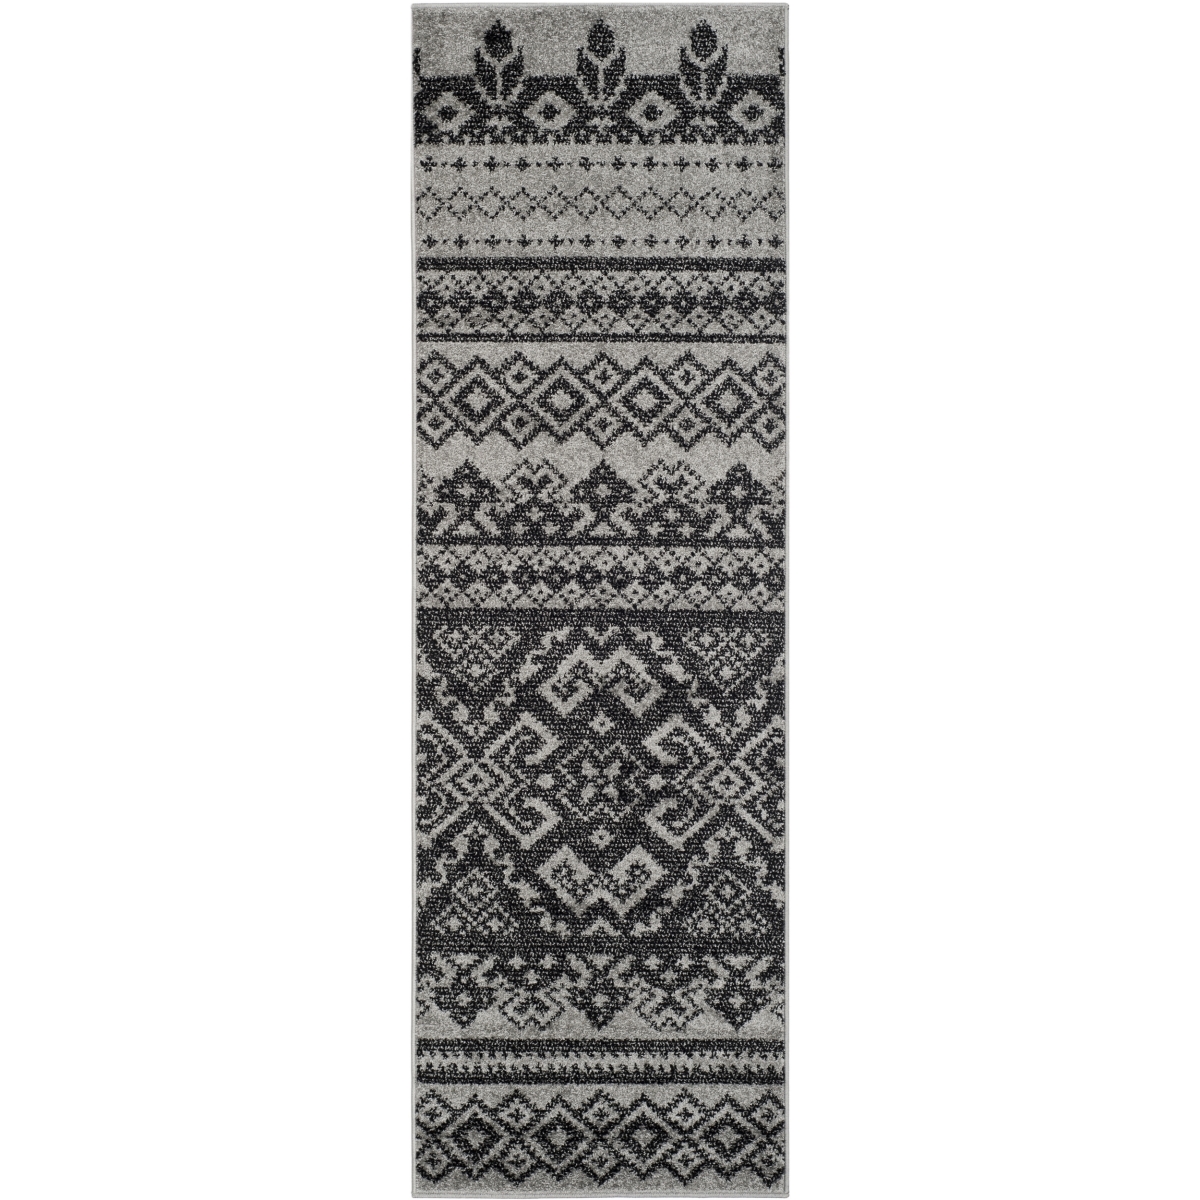 Adr107a-216 Adirondack Runner Rug, Silver & Black - 2 Ft. 6 In. X 16 Ft.